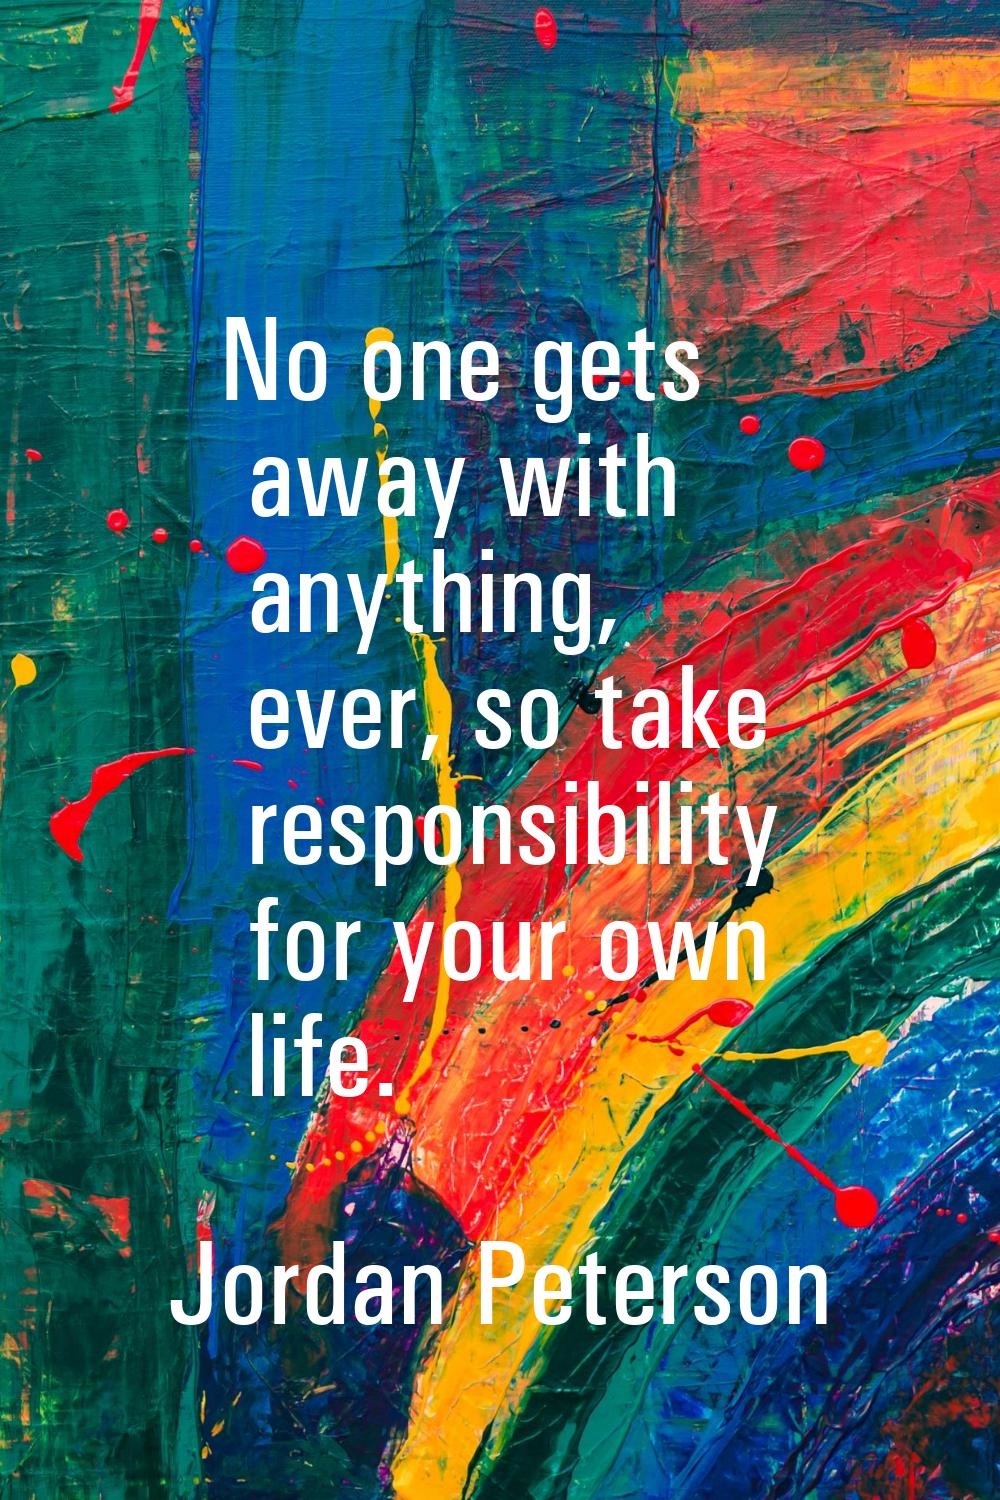 No one gets away with anything, ever, so take responsibility for your own life.